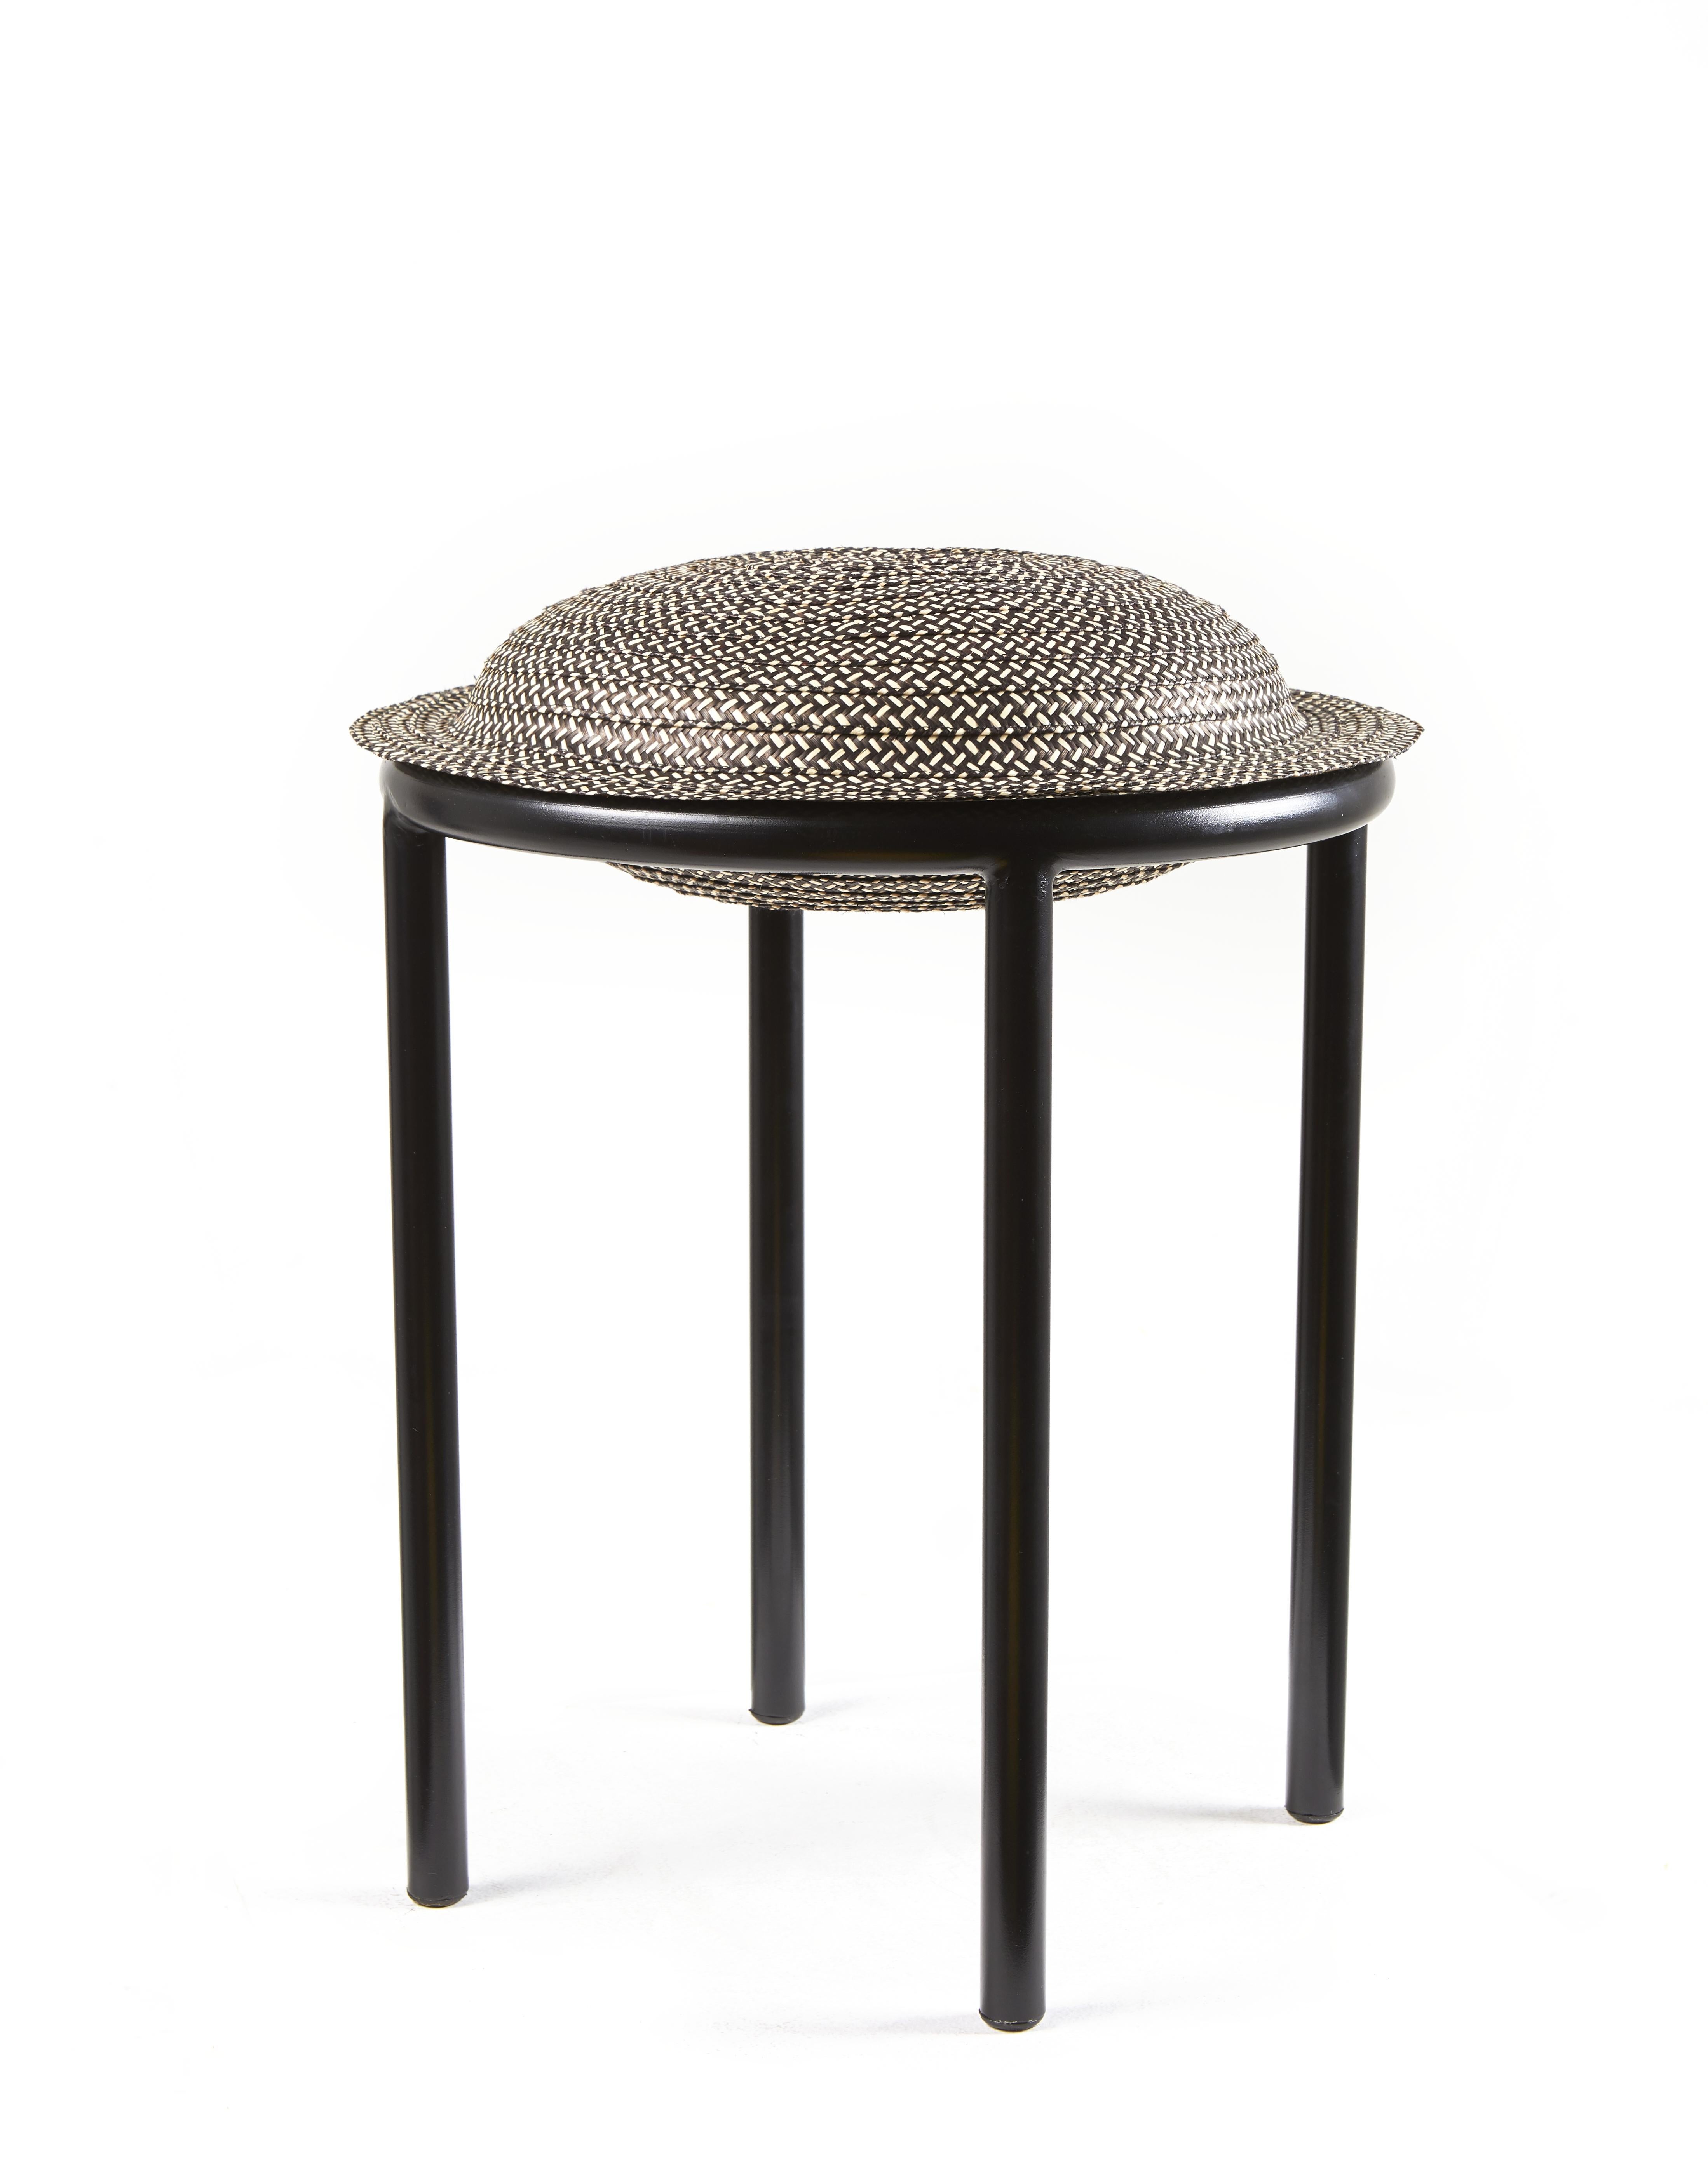 Black cana stool by Pauline Deltour by Cristina Celestino
Materials: galvanized and powder-coated tubular steel. Caña Flecha.
Technique: hand-woven with natural fibers in Colombia. Natural dyed. 
Dimensions: diameter 40.2 x height 48.1 cm